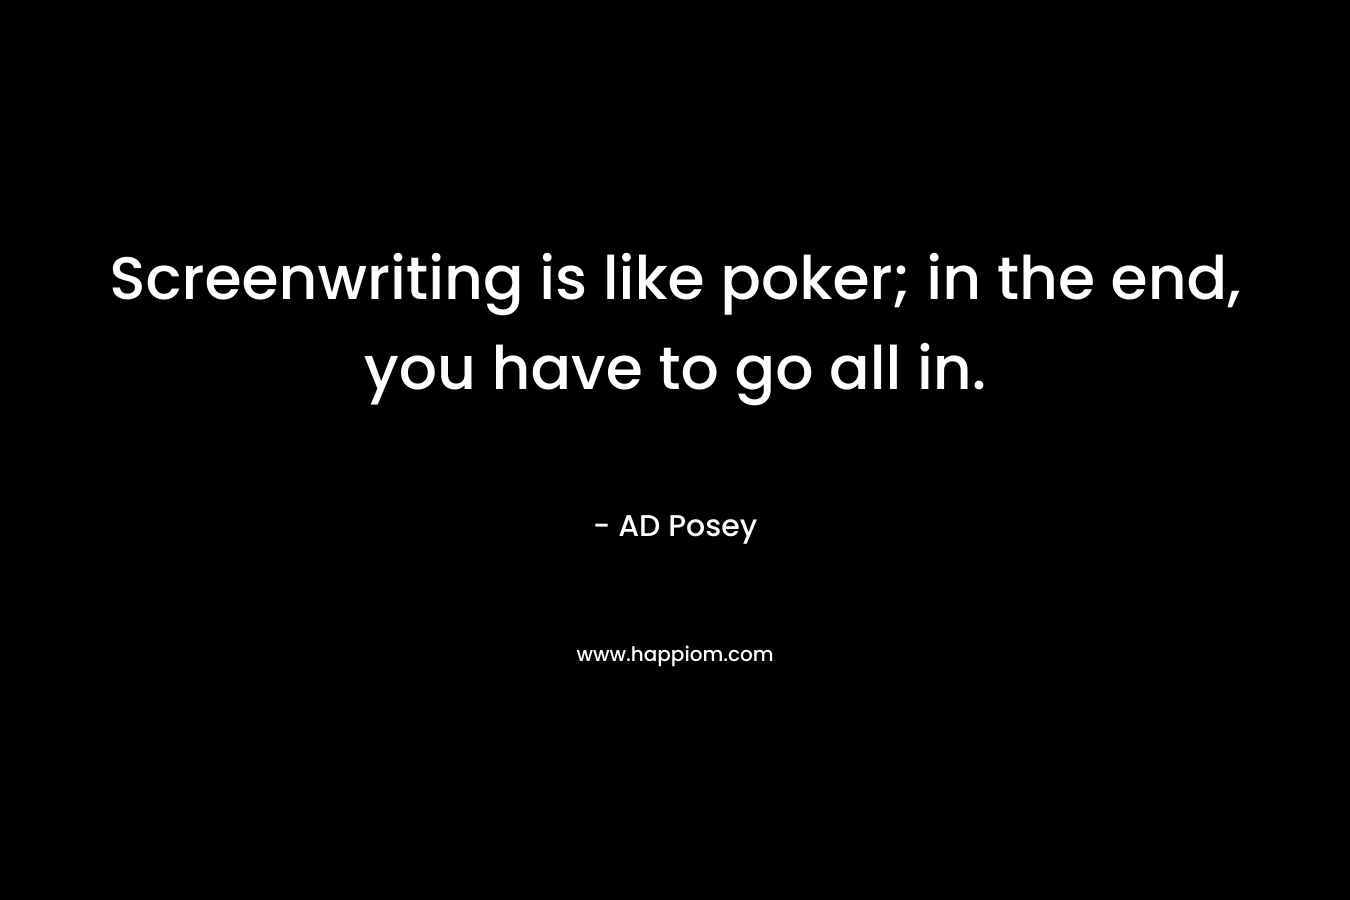 Screenwriting is like poker; in the end, you have to go all in. – AD Posey